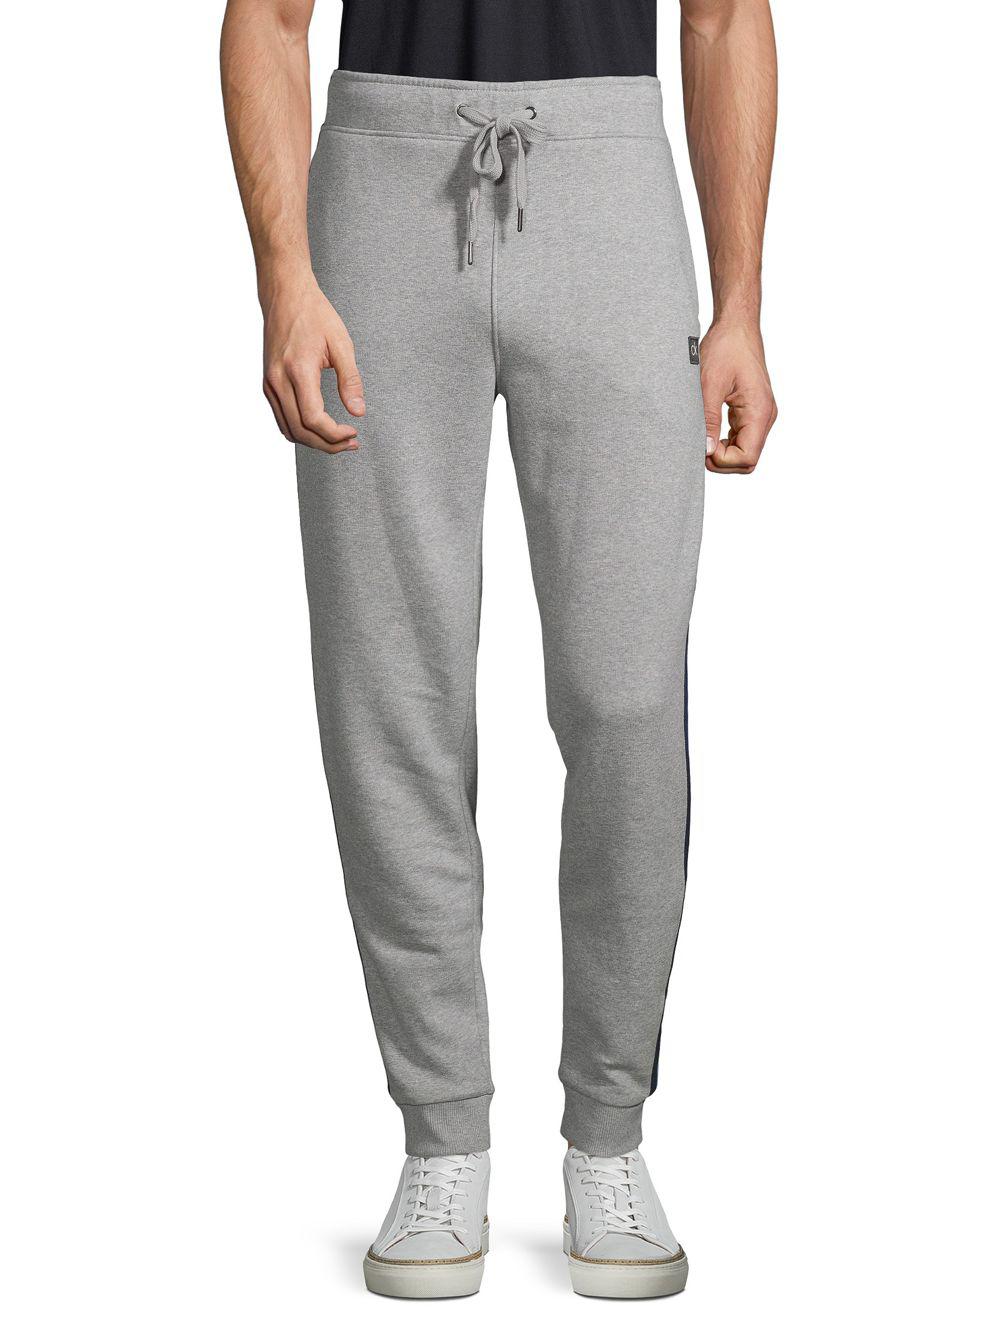 Calvin Klein Cotton Classic Jogger Pants in Grey (Gray) for Men - Lyst